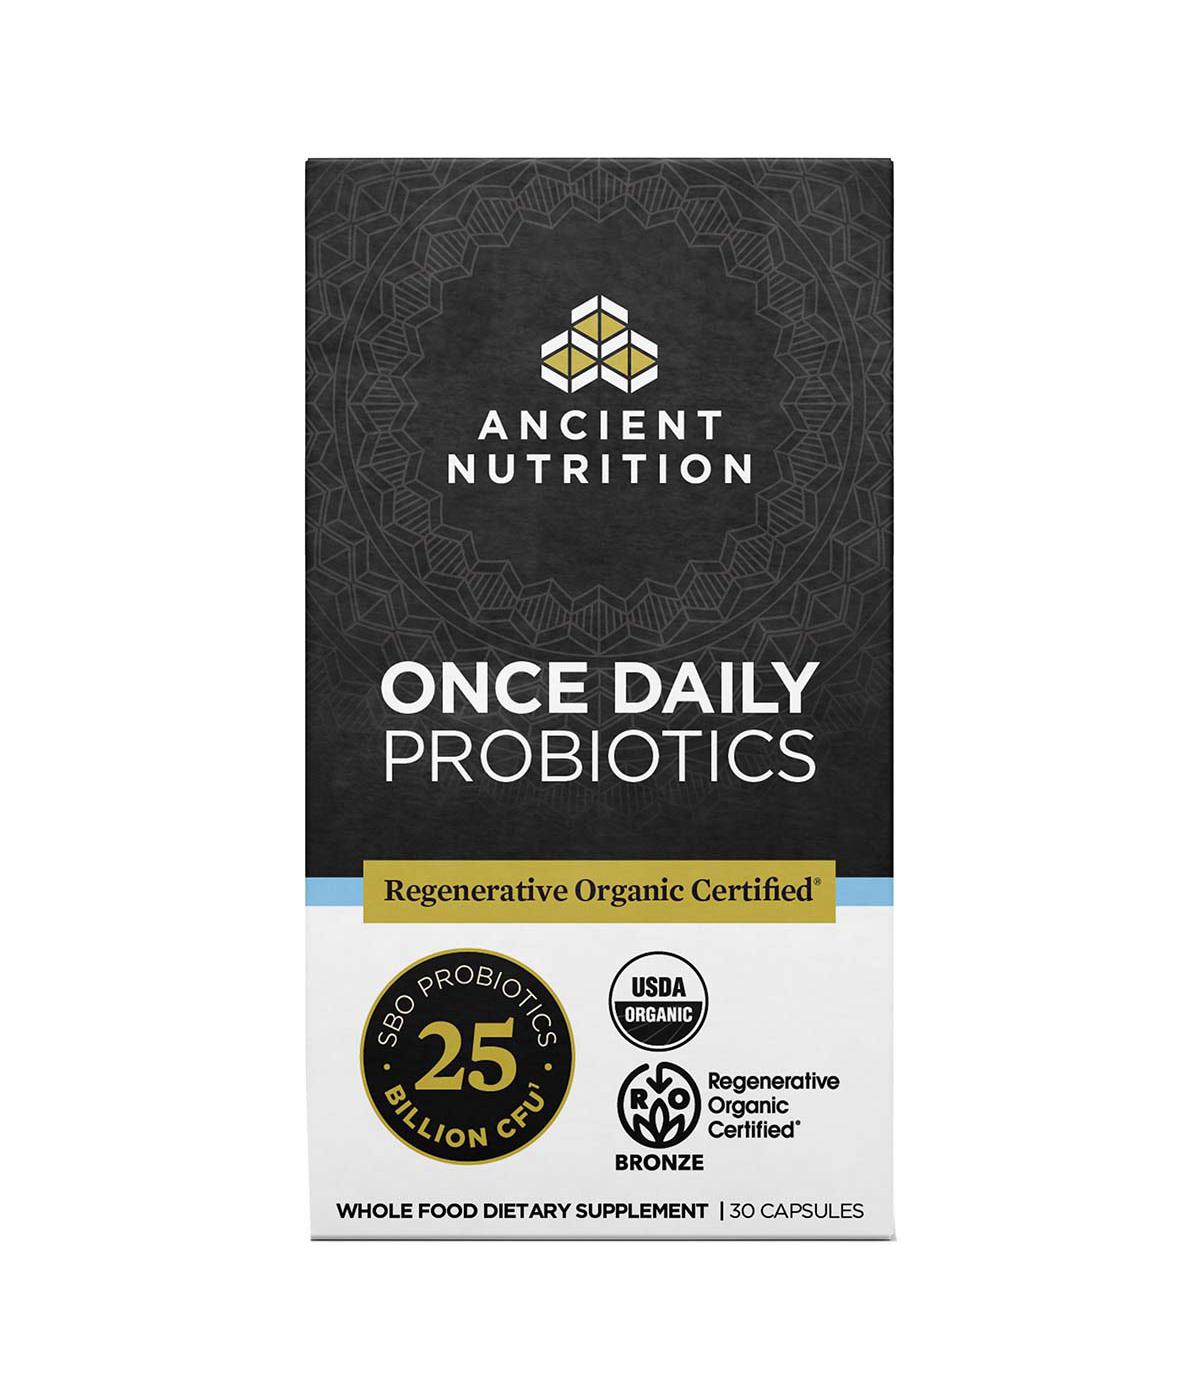 Ancient Nutrition Once Daily Probiotics Capsules; image 1 of 5